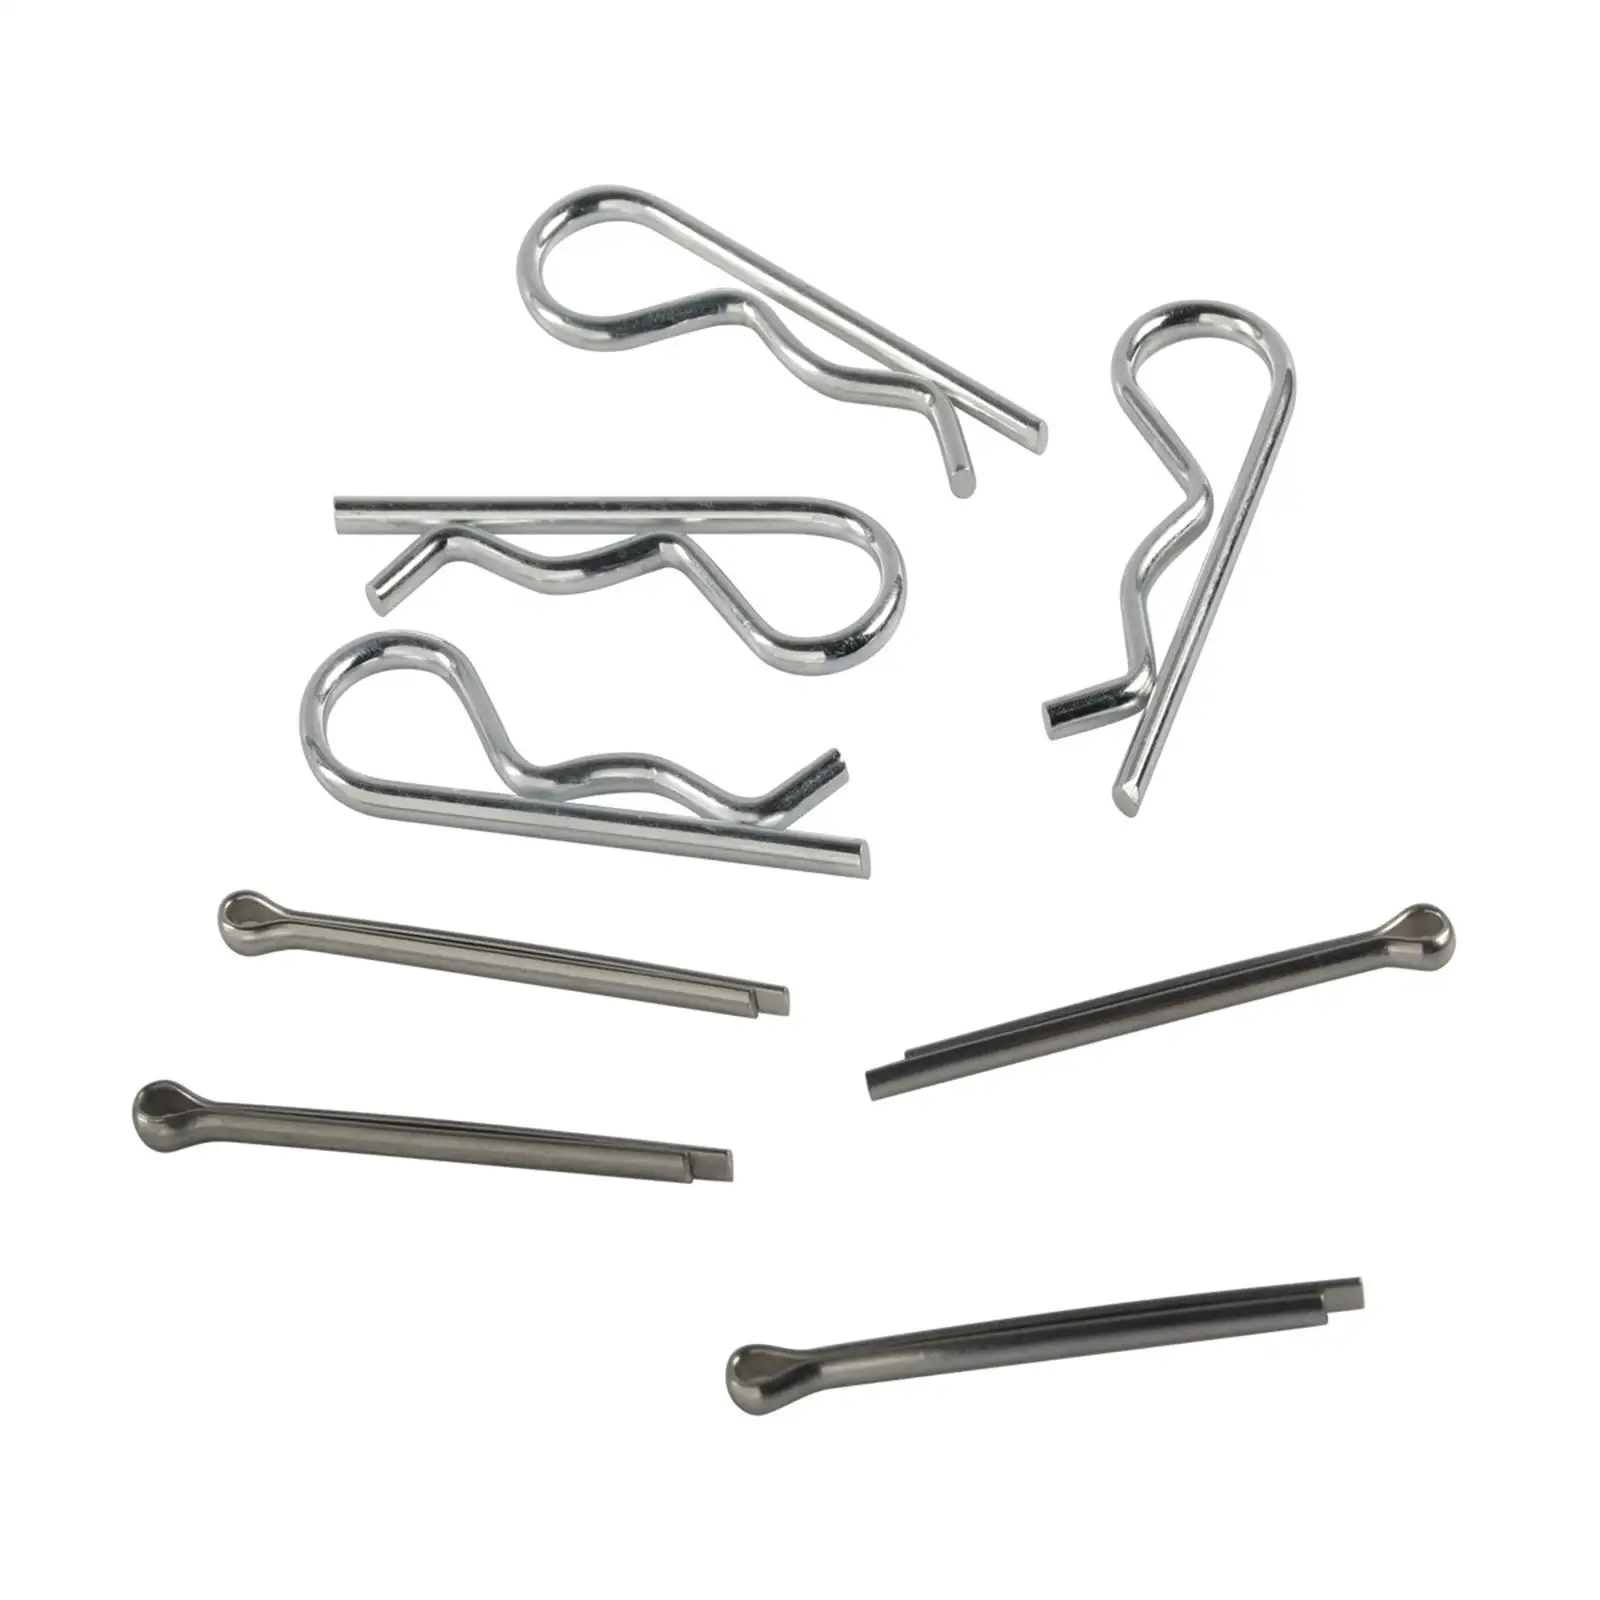 250x Cotter Pin Assortment Set R Clips for Truck Hitch Pin Lock Systems